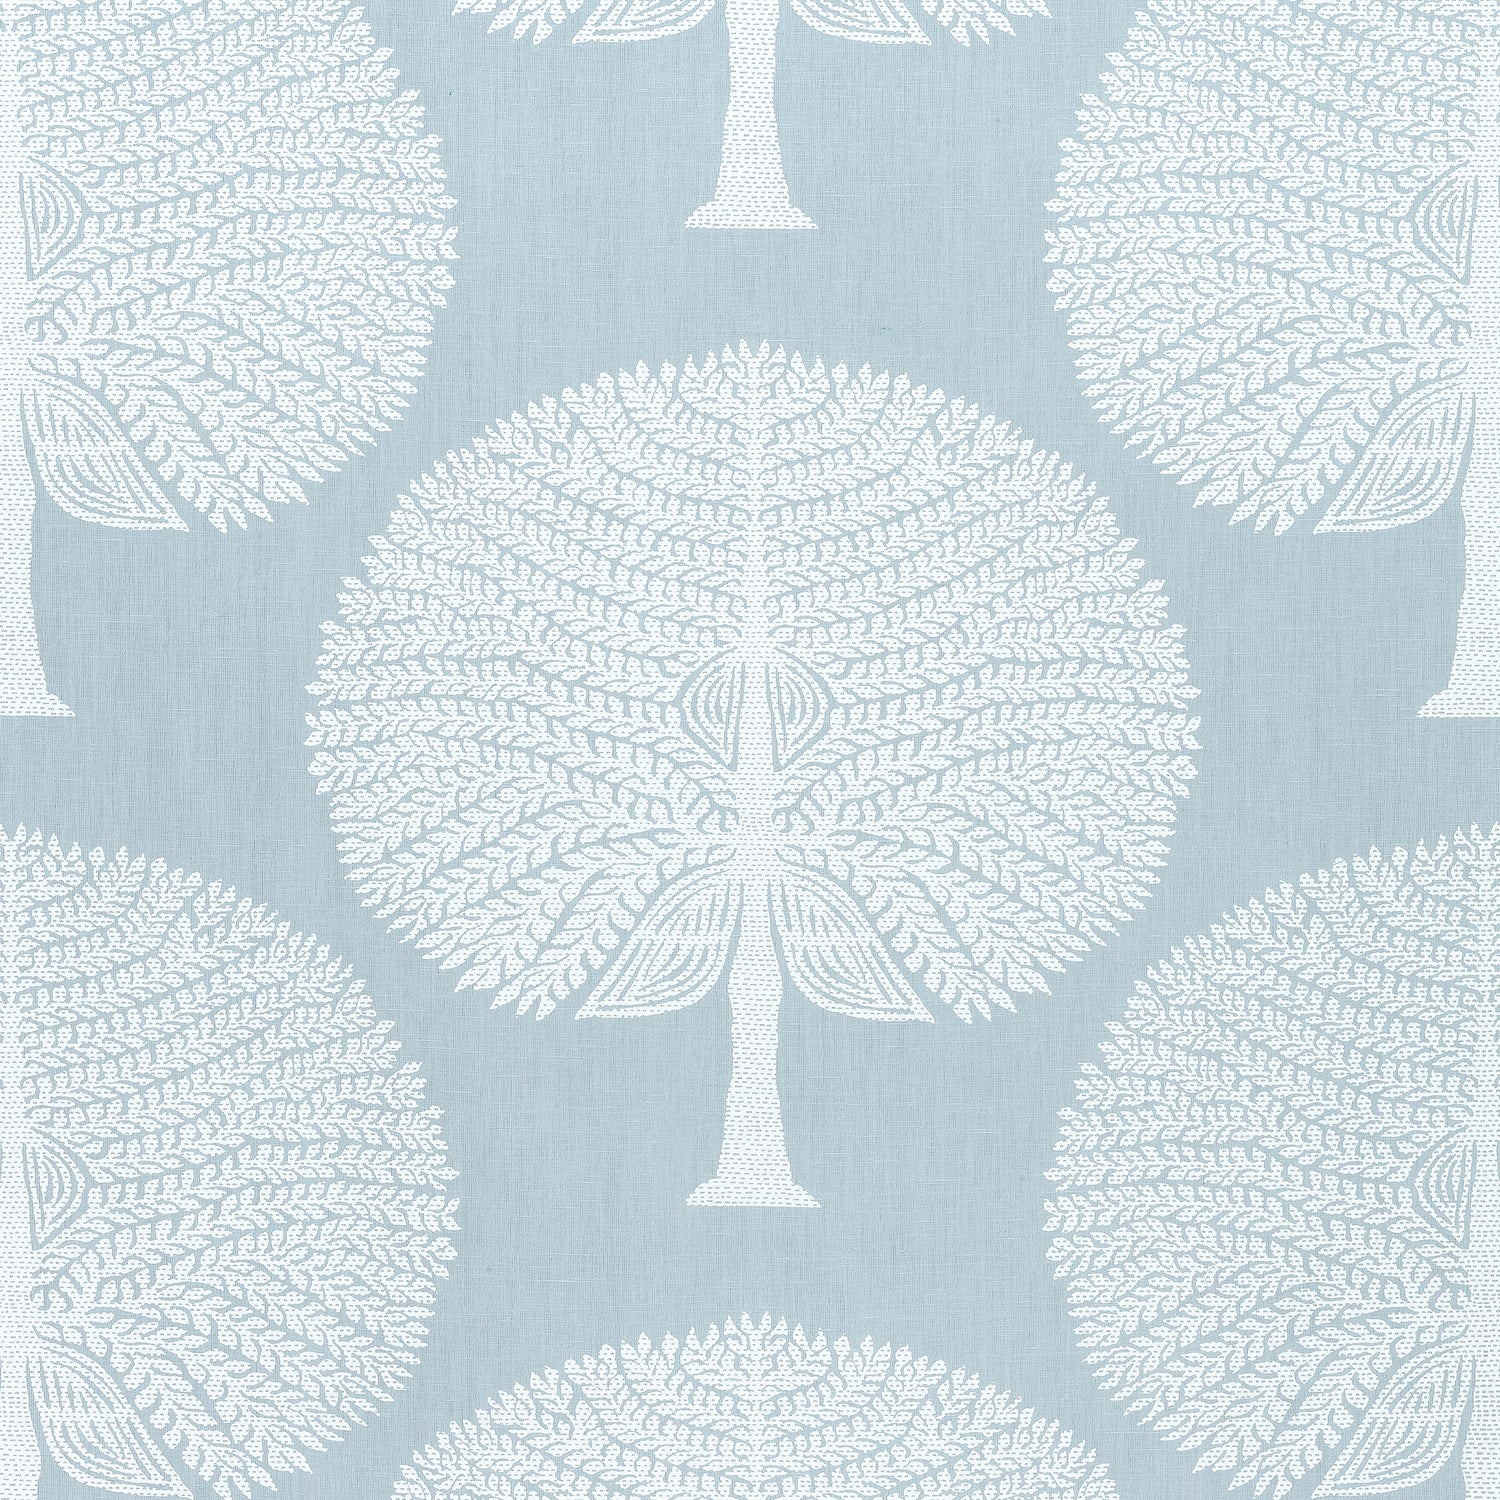 Mulberry Tree fabric in spa blue color - pattern number F910600 - by Thibaut in the Ceylon collection